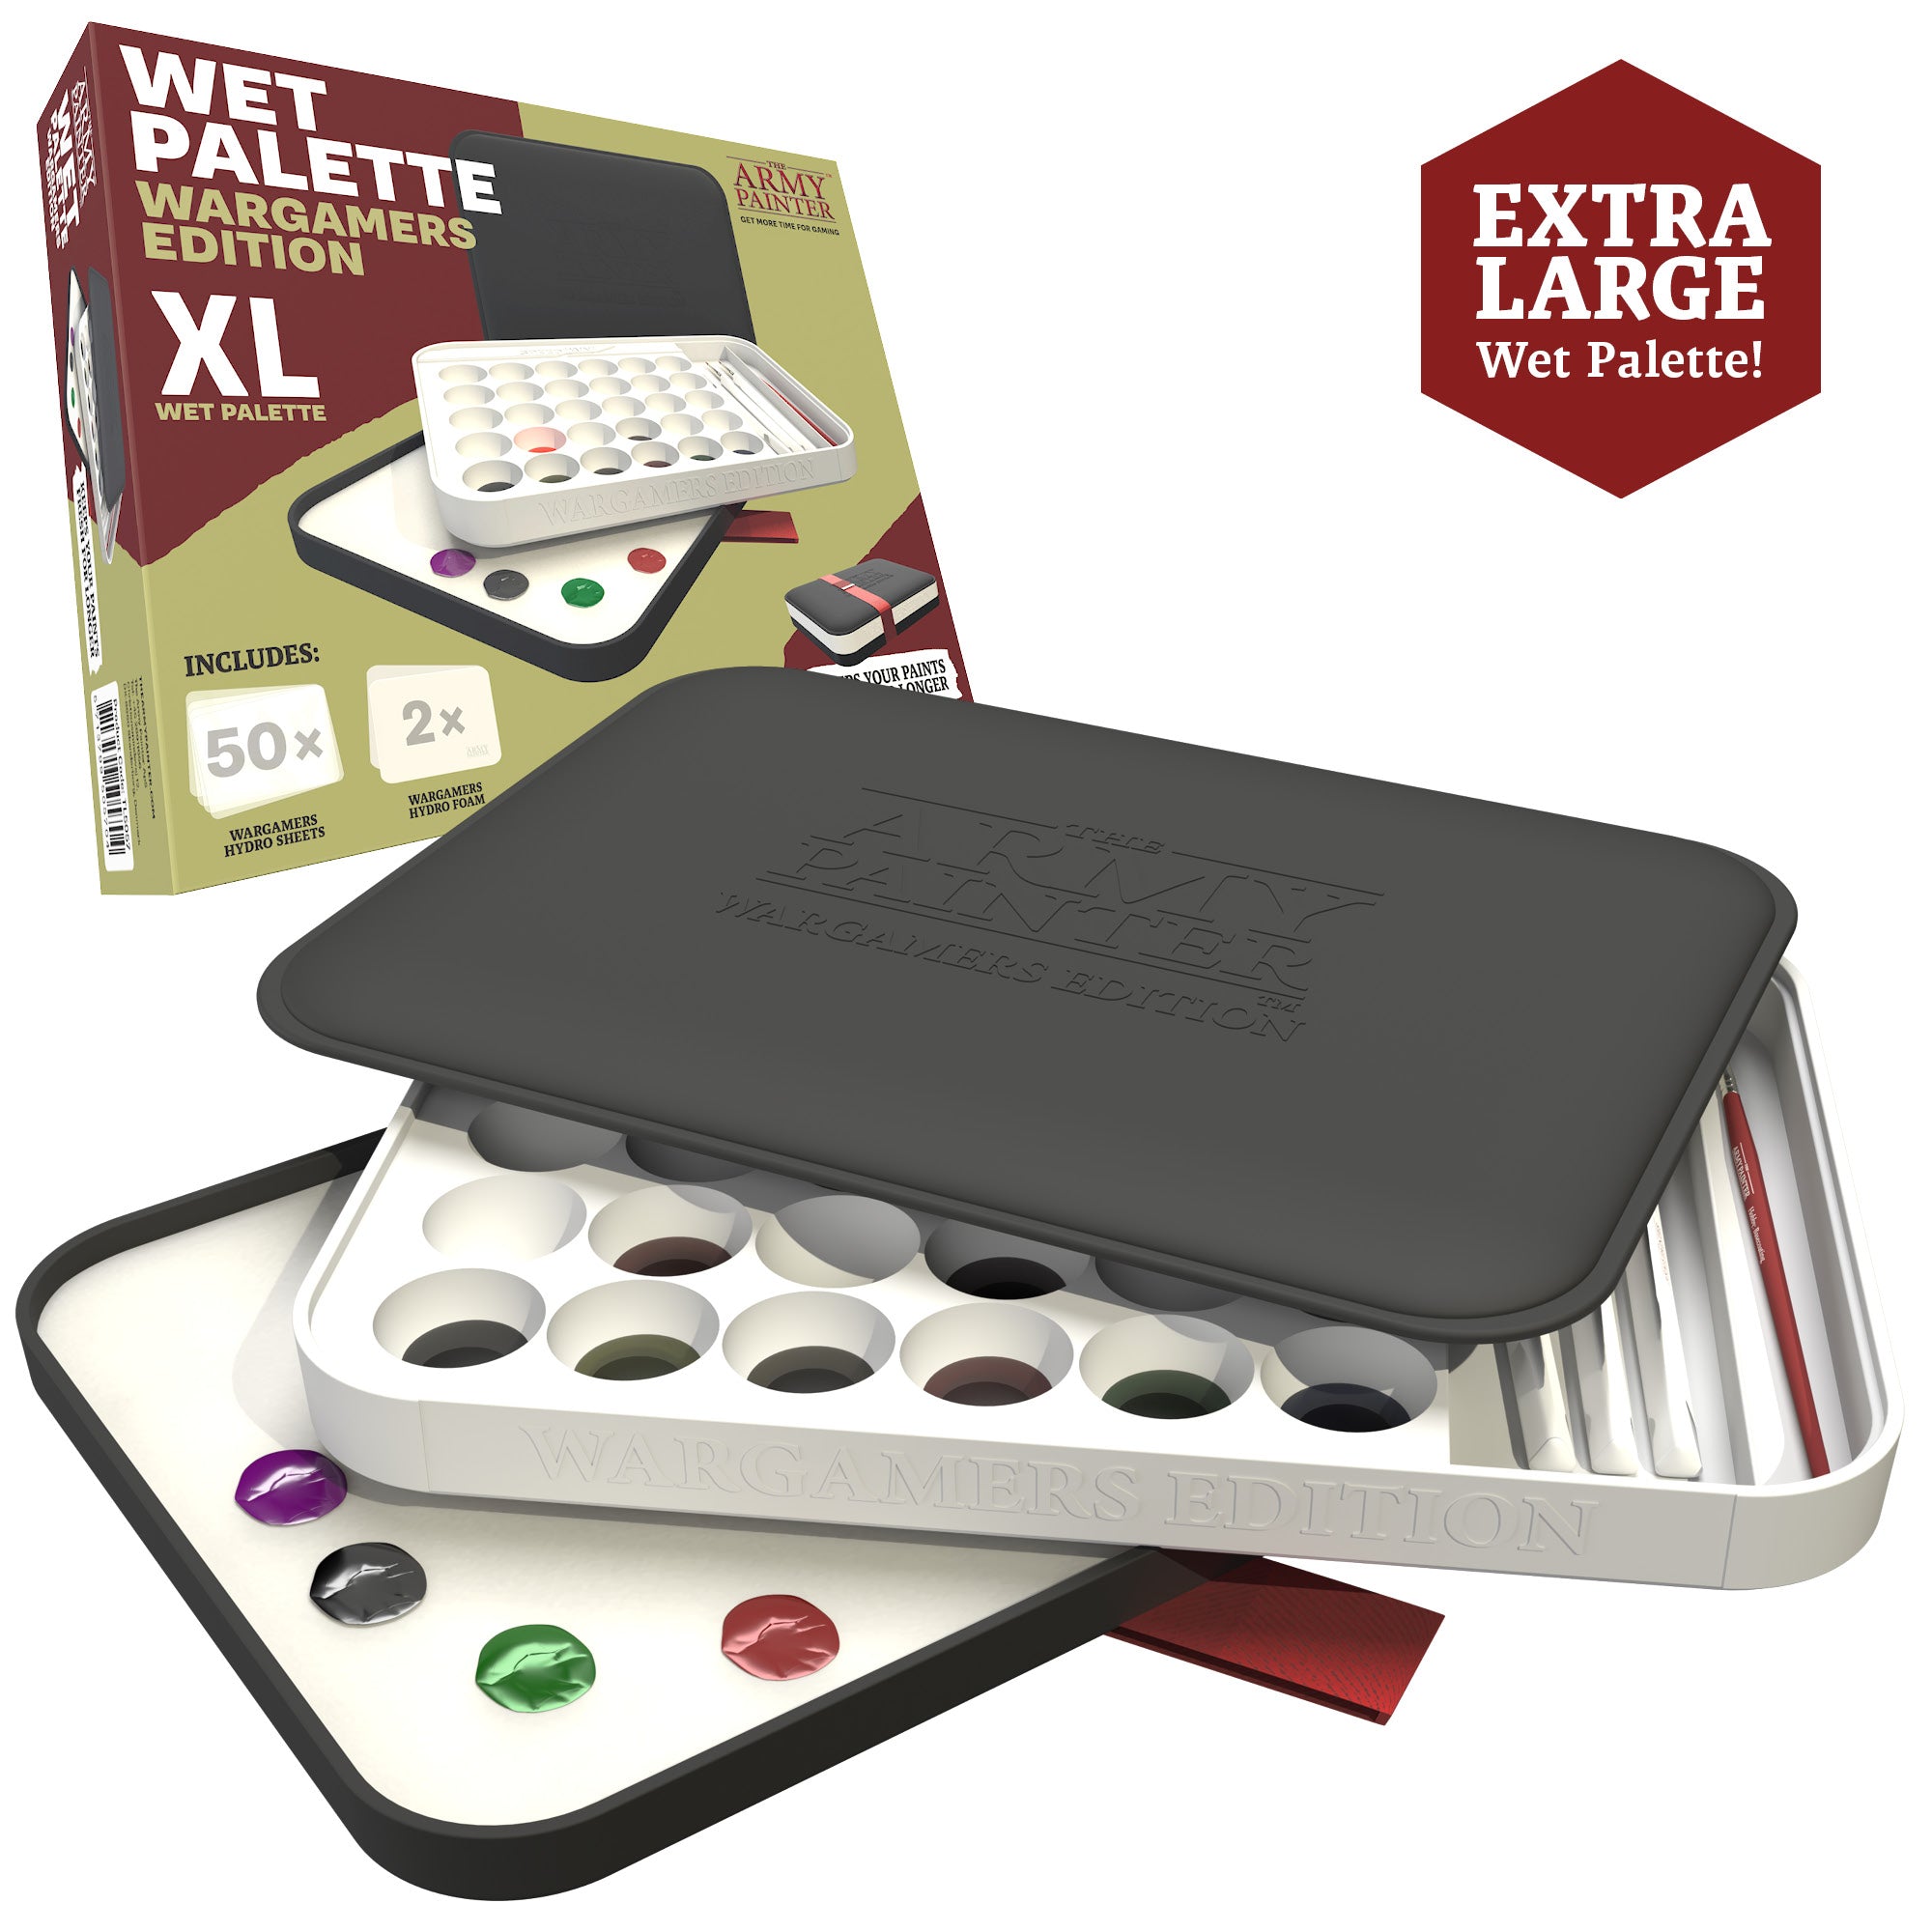 The Army Painter: Army Painter Wet Palette